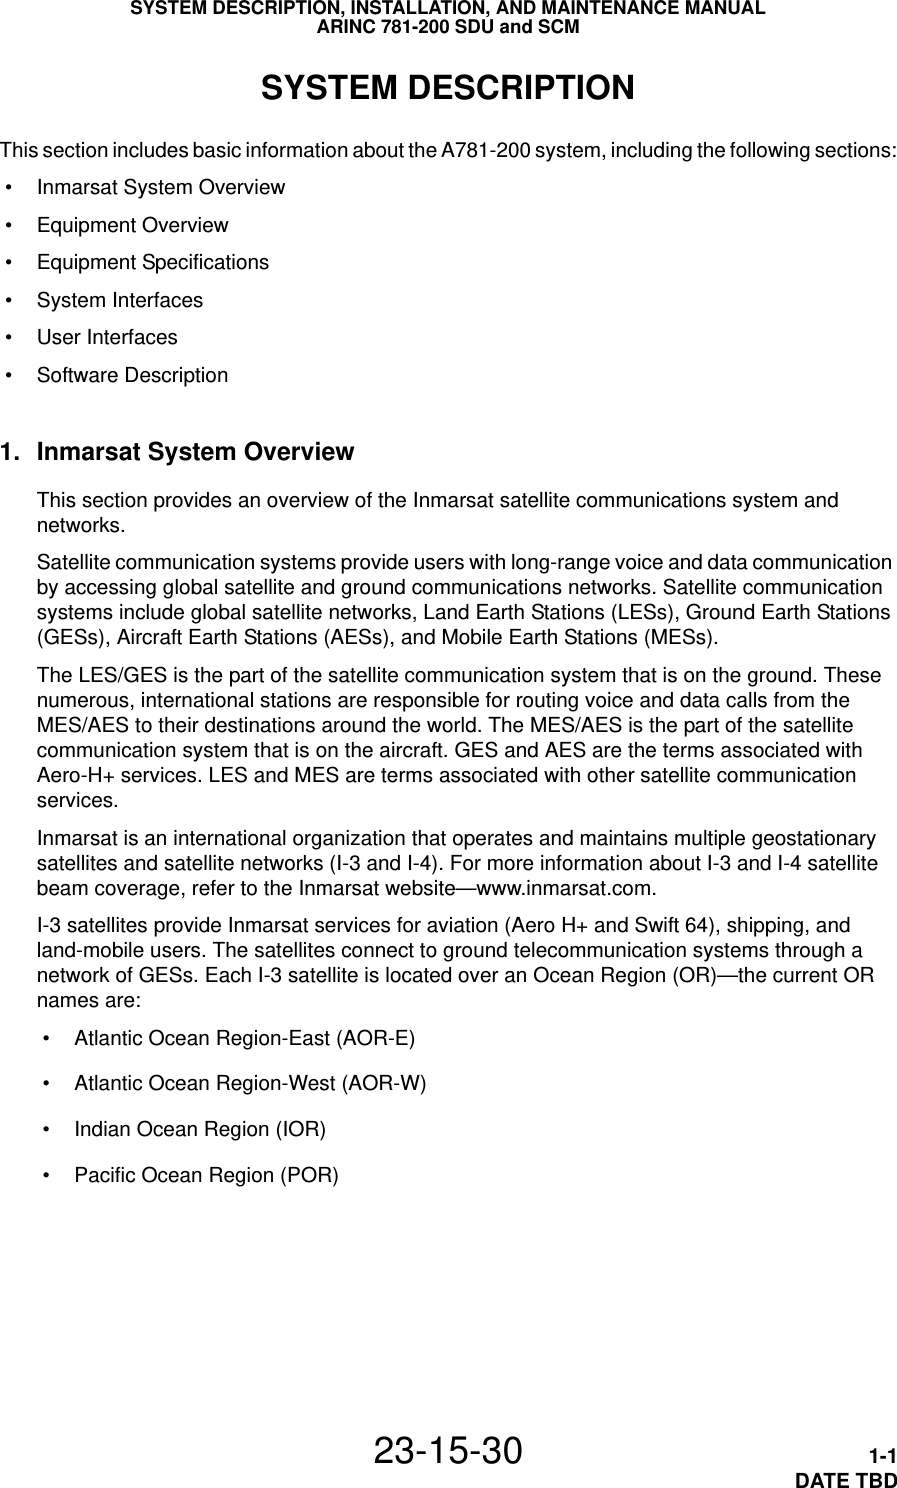 SYSTEM DESCRIPTION, INSTALLATION, AND MAINTENANCE MANUALARINC 781-200 SDU and SCM23-15-30 1-1DATE TBDSYSTEM DESCRIPTIONThis section includes basic information about the A781-200 system, including the following sections: • Inmarsat System Overview • Equipment Overview • Equipment Specifications • System Interfaces • User Interfaces • Software Description1. Inmarsat System OverviewThis section provides an overview of the Inmarsat satellite communications system and networks.Satellite communication systems provide users with long-range voice and data communication by accessing global satellite and ground communications networks. Satellite communication systems include global satellite networks, Land Earth Stations (LESs), Ground Earth Stations (GESs), Aircraft Earth Stations (AESs), and Mobile Earth Stations (MESs).The LES/GES is the part of the satellite communication system that is on the ground. These numerous, international stations are responsible for routing voice and data calls from the MES/AES to their destinations around the world. The MES/AES is the part of the satellite communication system that is on the aircraft. GES and AES are the terms associated with Aero-H+ services. LES and MES are terms associated with other satellite communication services.Inmarsat is an international organization that operates and maintains multiple geostationary satellites and satellite networks (I-3 and I-4). For more information about I-3 and I-4 satellite beam coverage, refer to the Inmarsat website—www.inmarsat.com.I-3 satellites provide Inmarsat services for aviation (Aero H+ and Swift 64), shipping, and land-mobile users. The satellites connect to ground telecommunication systems through a network of GESs. Each I-3 satellite is located over an Ocean Region (OR)—the current OR names are: • Atlantic Ocean Region-East (AOR-E) • Atlantic Ocean Region-West (AOR-W) • Indian Ocean Region (IOR) • Pacific Ocean Region (POR)